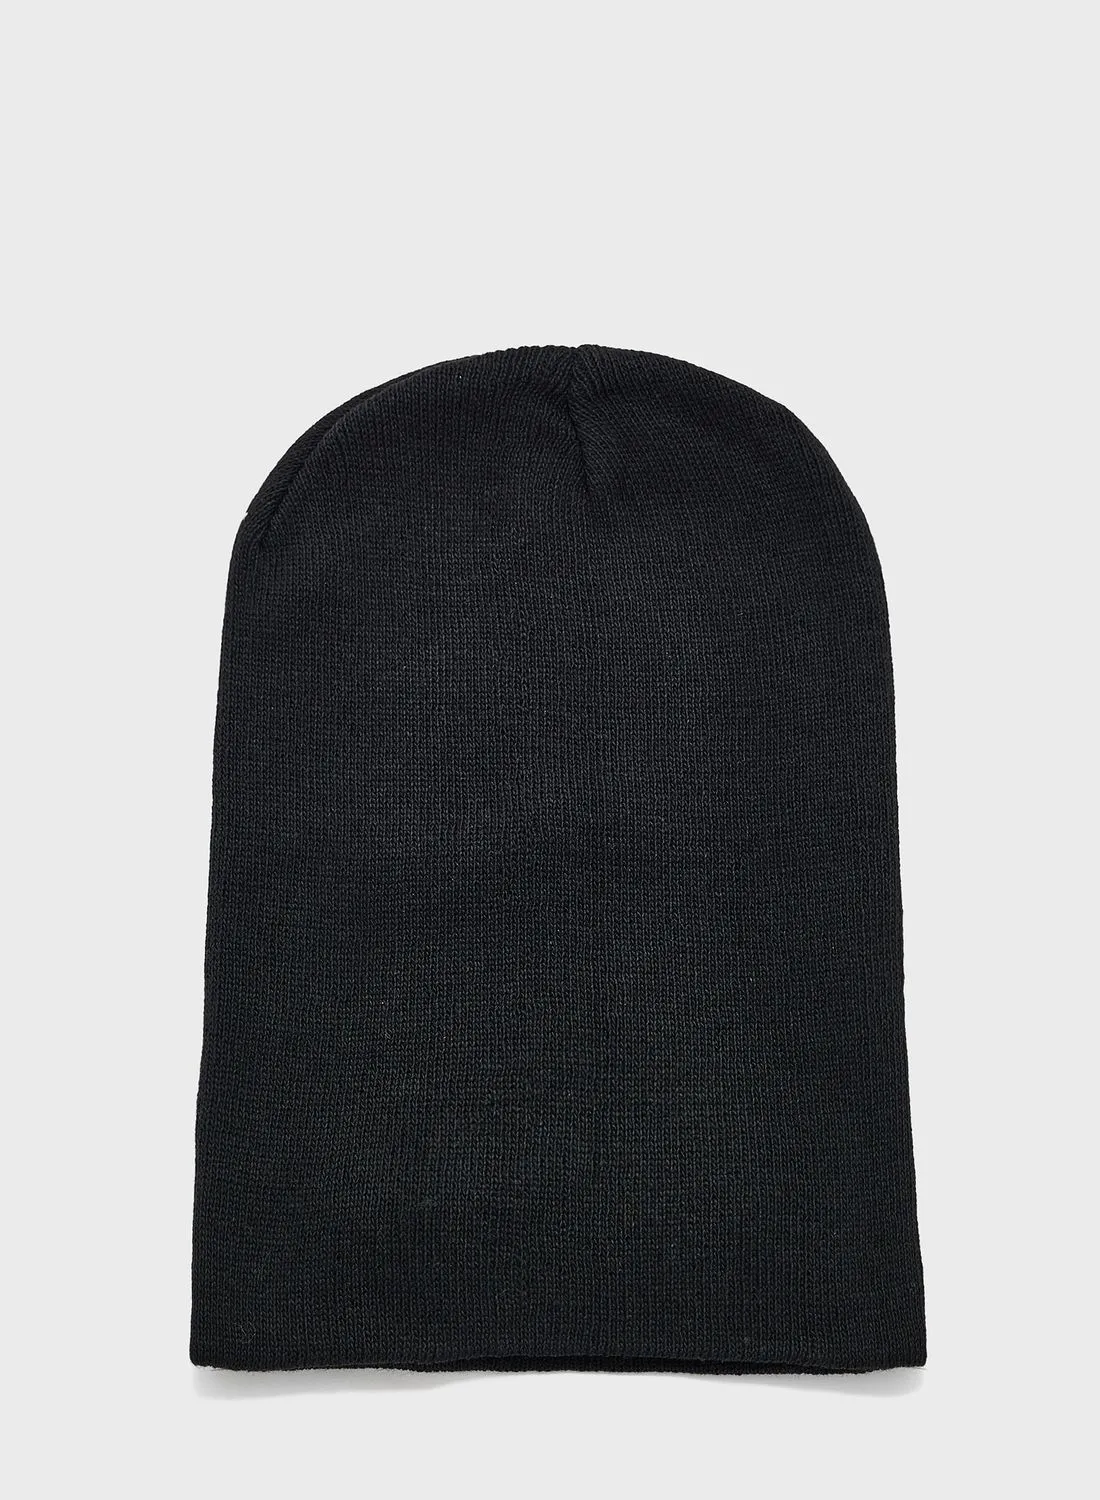 Seventy Five Casual Knitted Winter Beanie